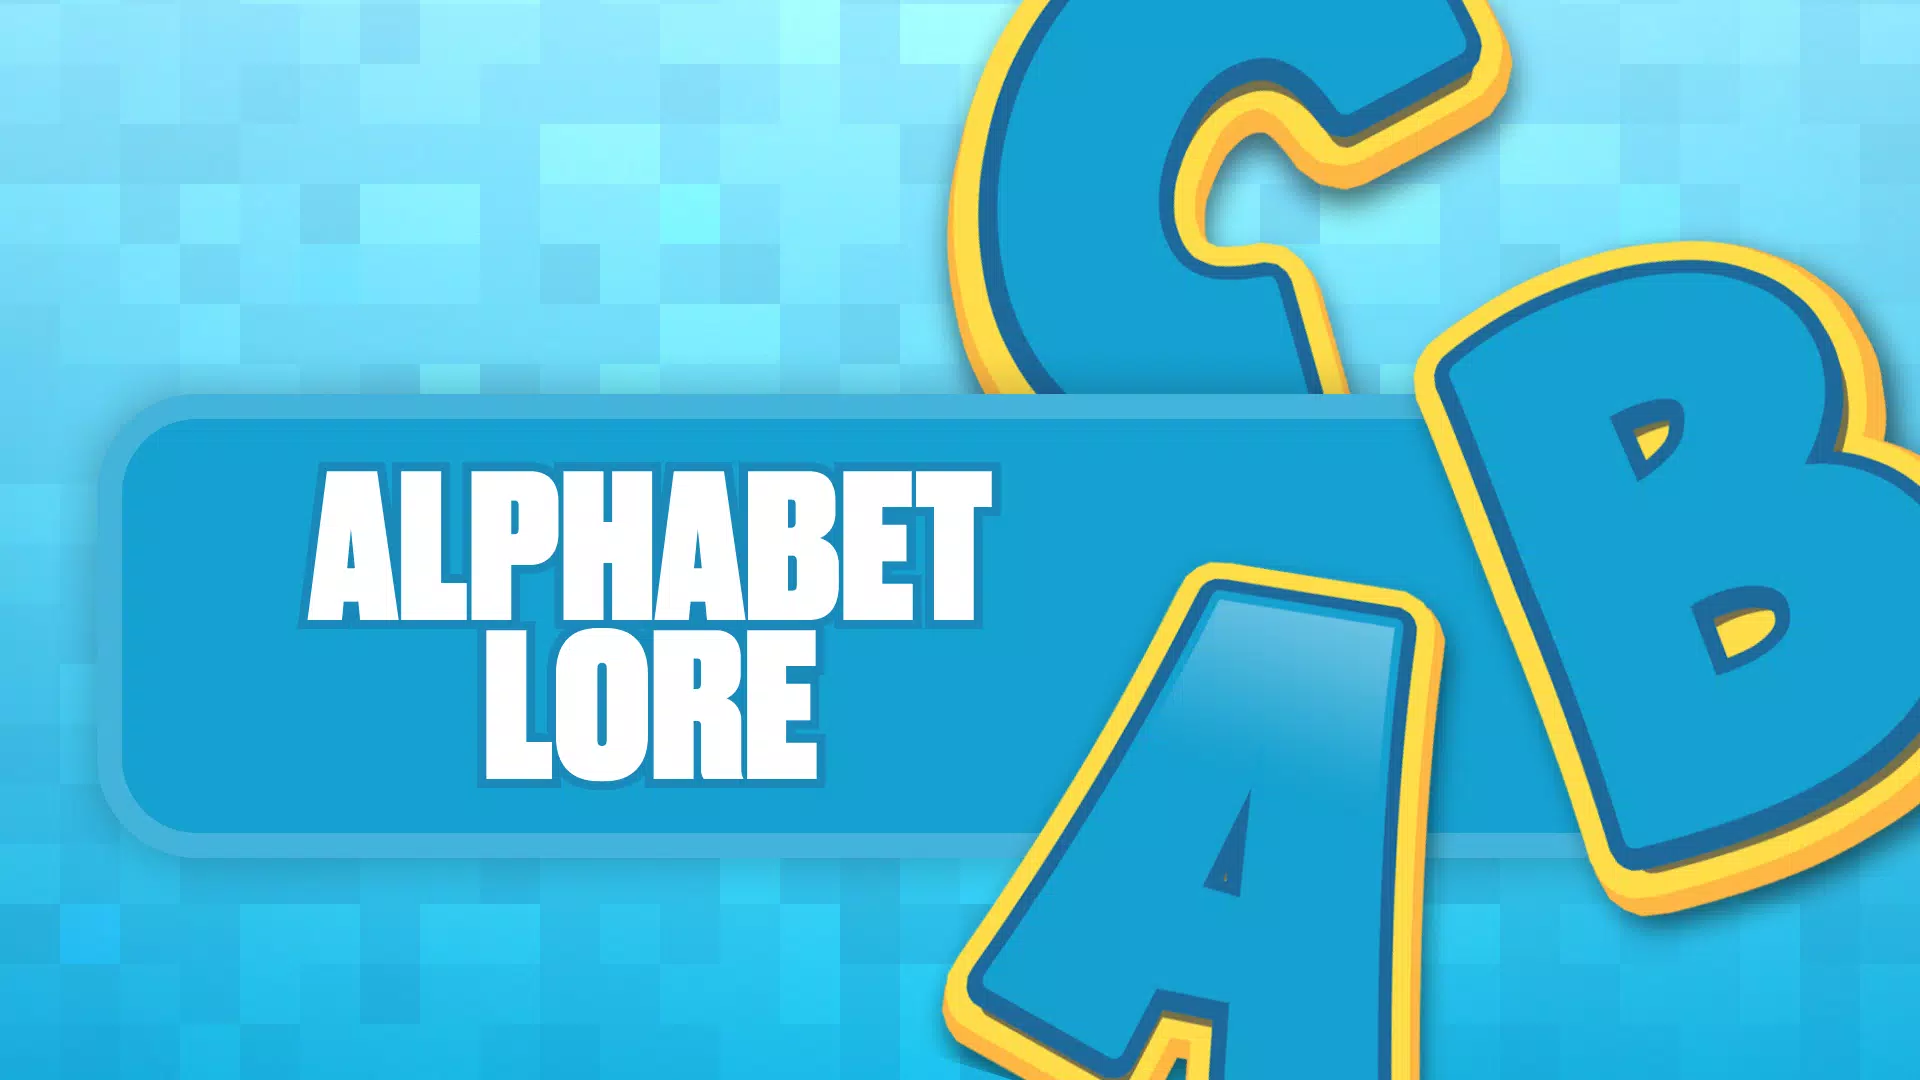 A (alphabet lore) In minecraft style - Download Free 3D model by